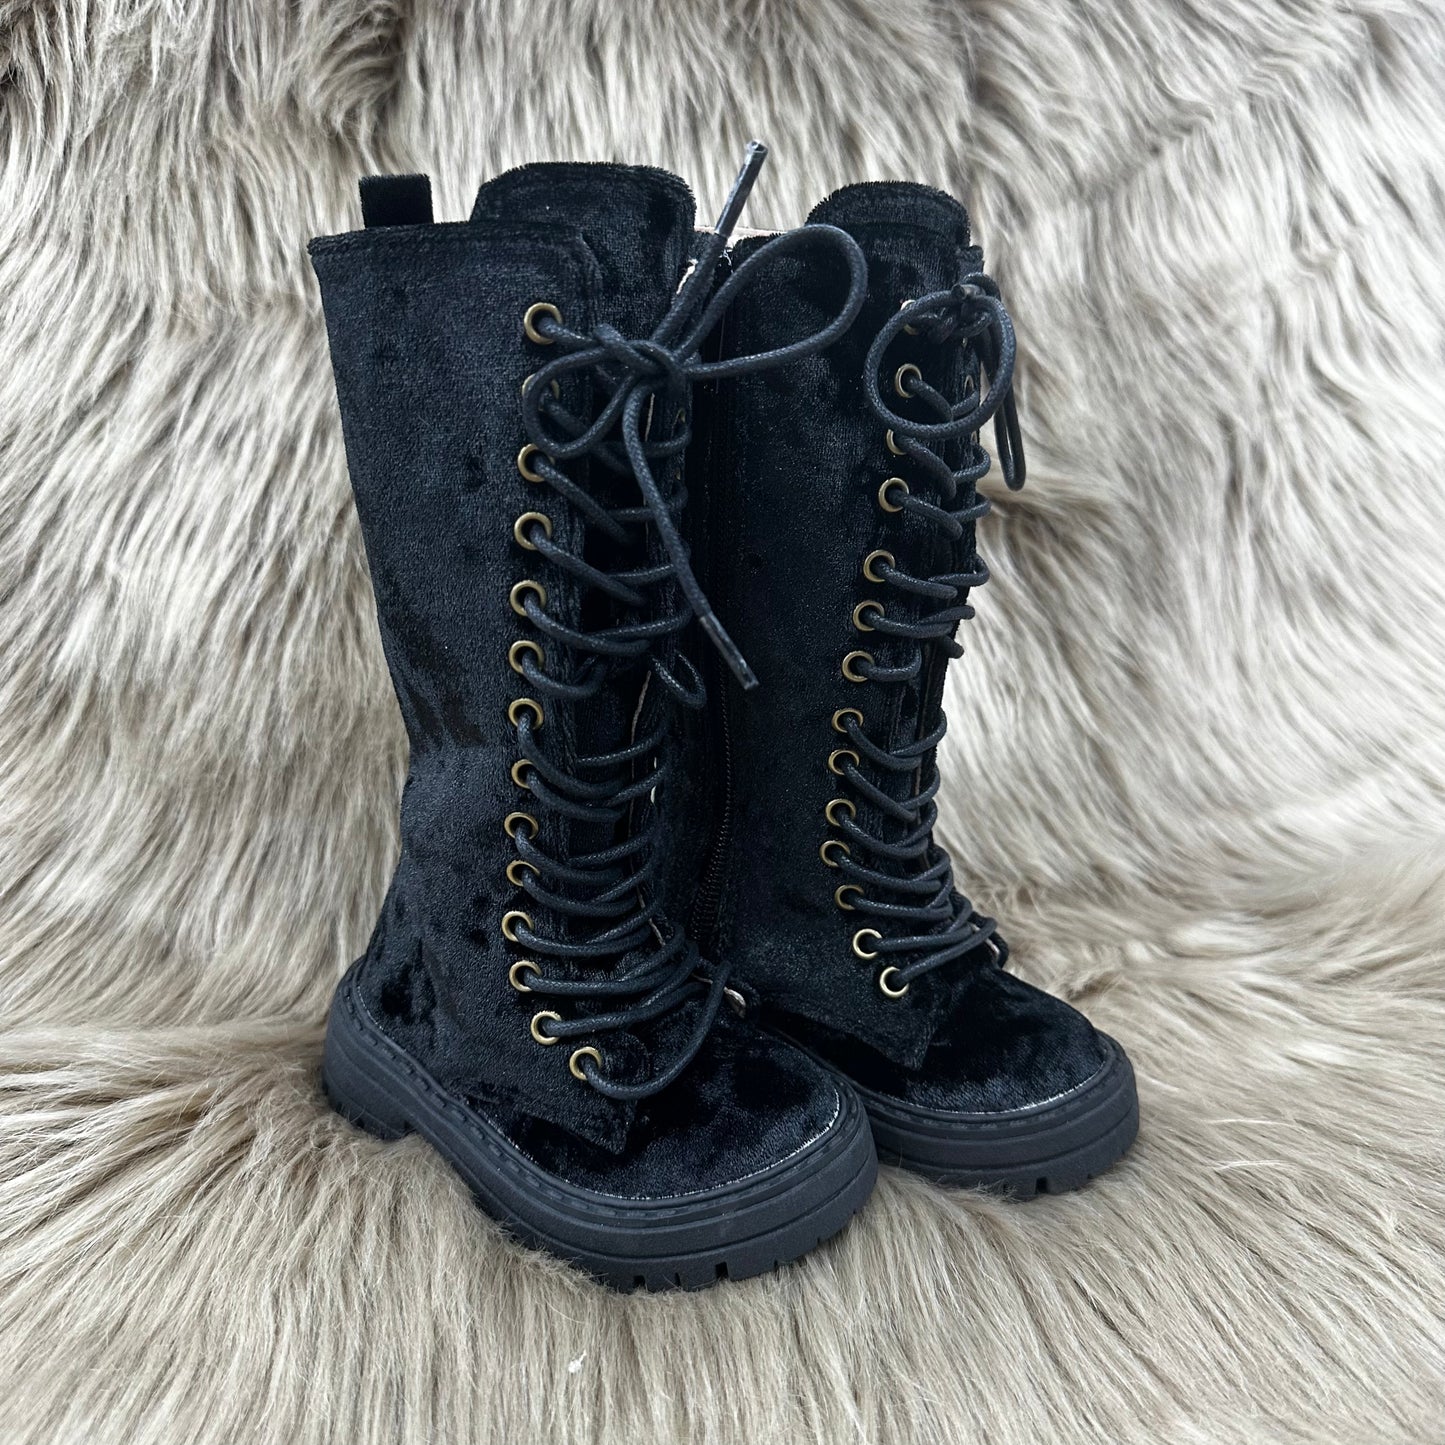 RTS Black Crushed Velvet Tall Boots